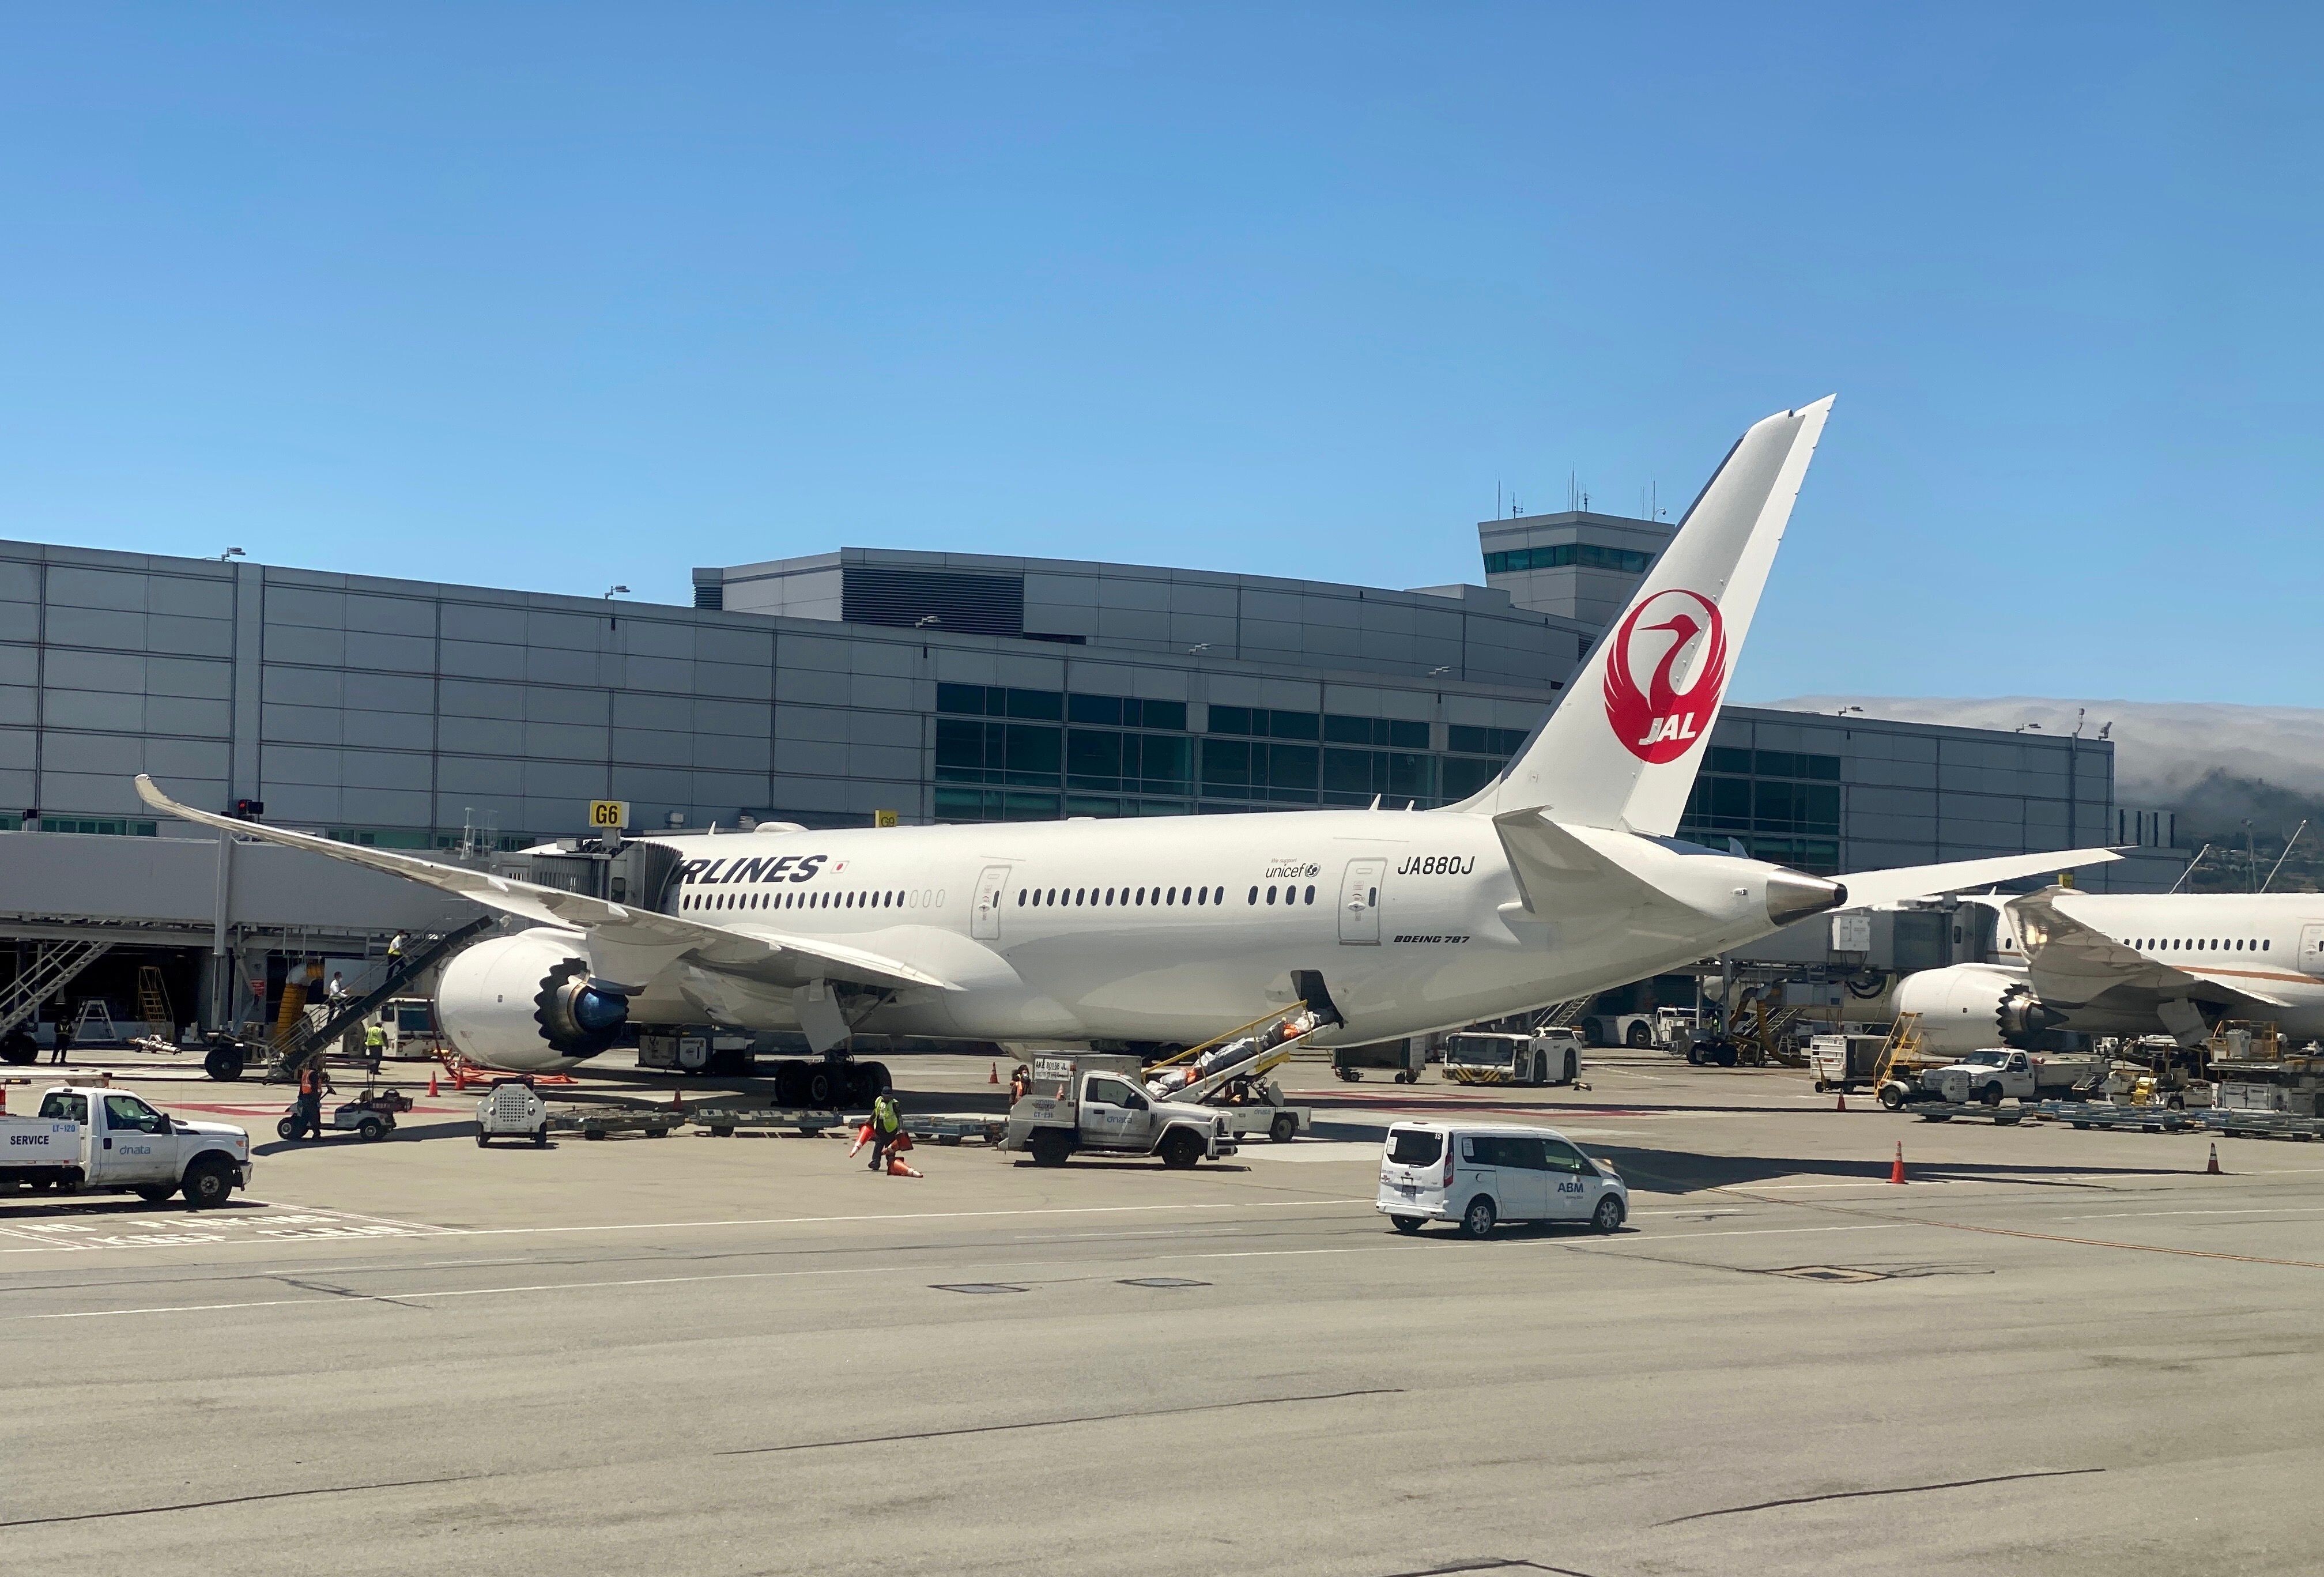 Japan Airlines (JAL) plans to operate a 206-seat Boeing 787-8 aircraft on the Guangzhou route from October 2. Photo: AFP